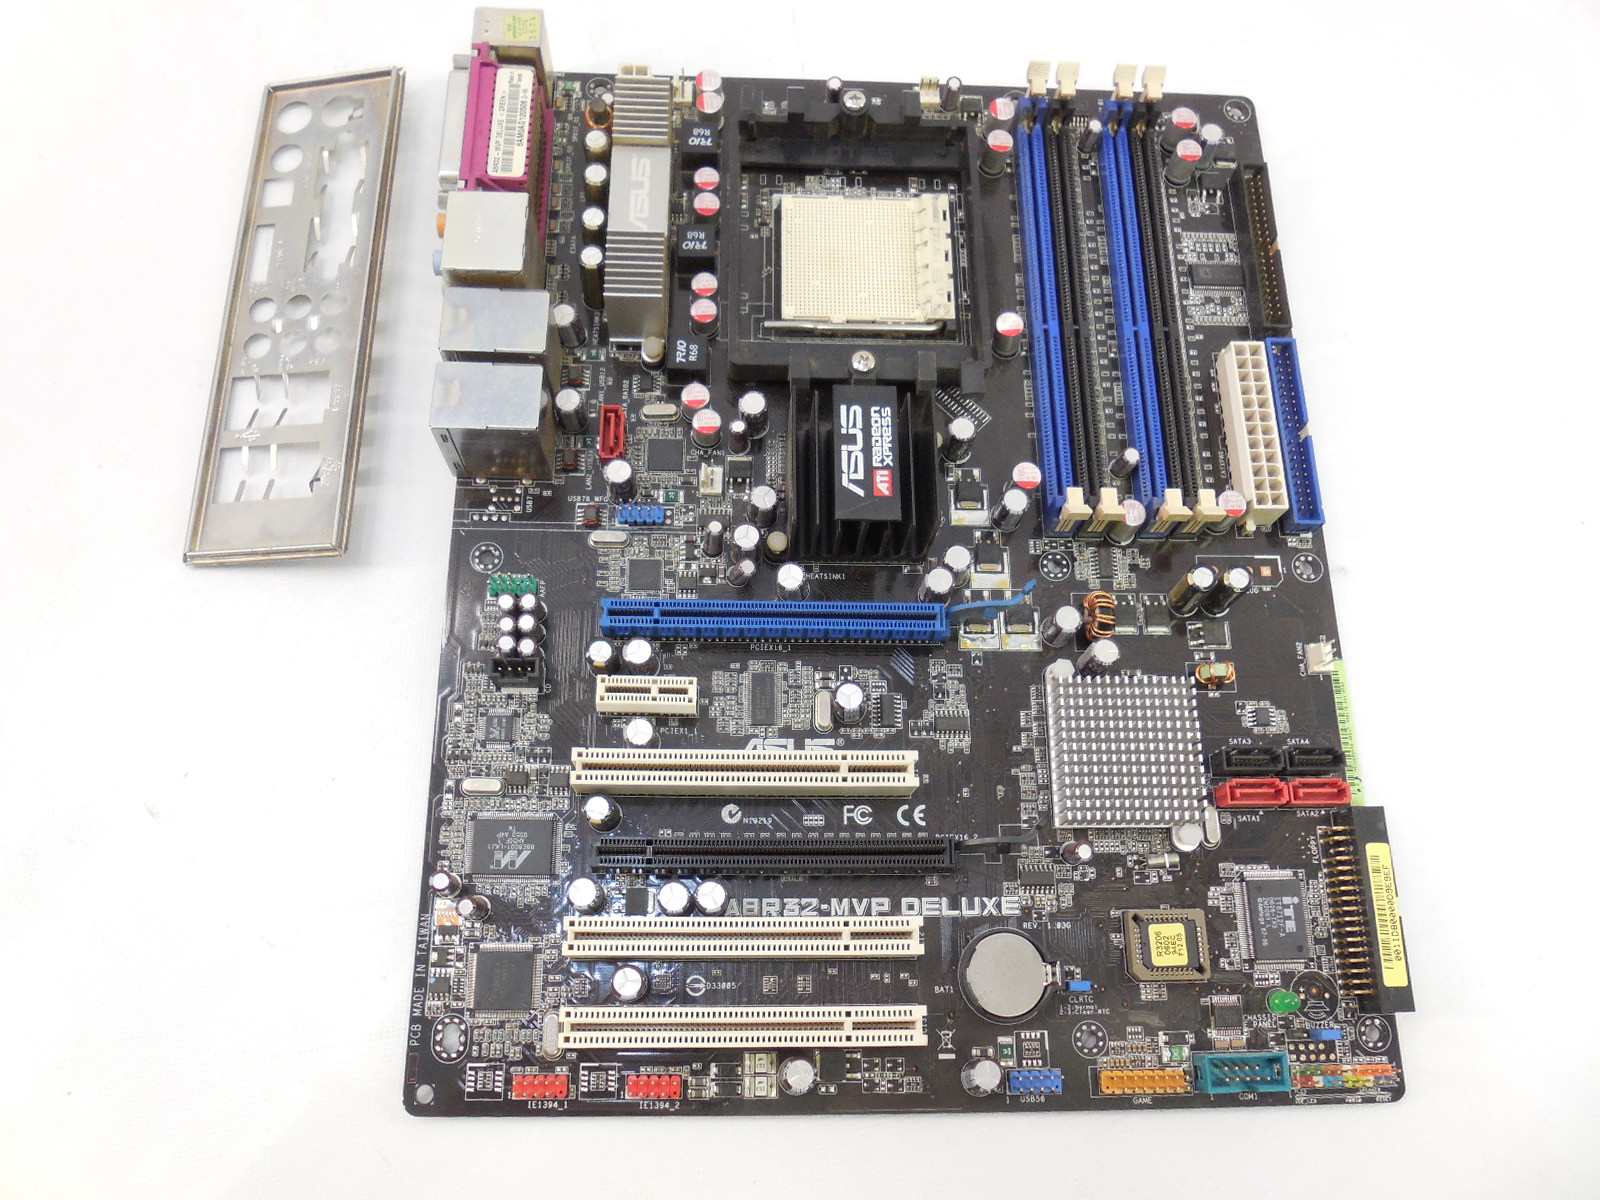 939 сокет. ASUS a8r32-MVP Deluxe. ASUS m3a32-MVP Deluxe. ASUS Deluxe Socket 939. Socket 7 ASUS mvp3.